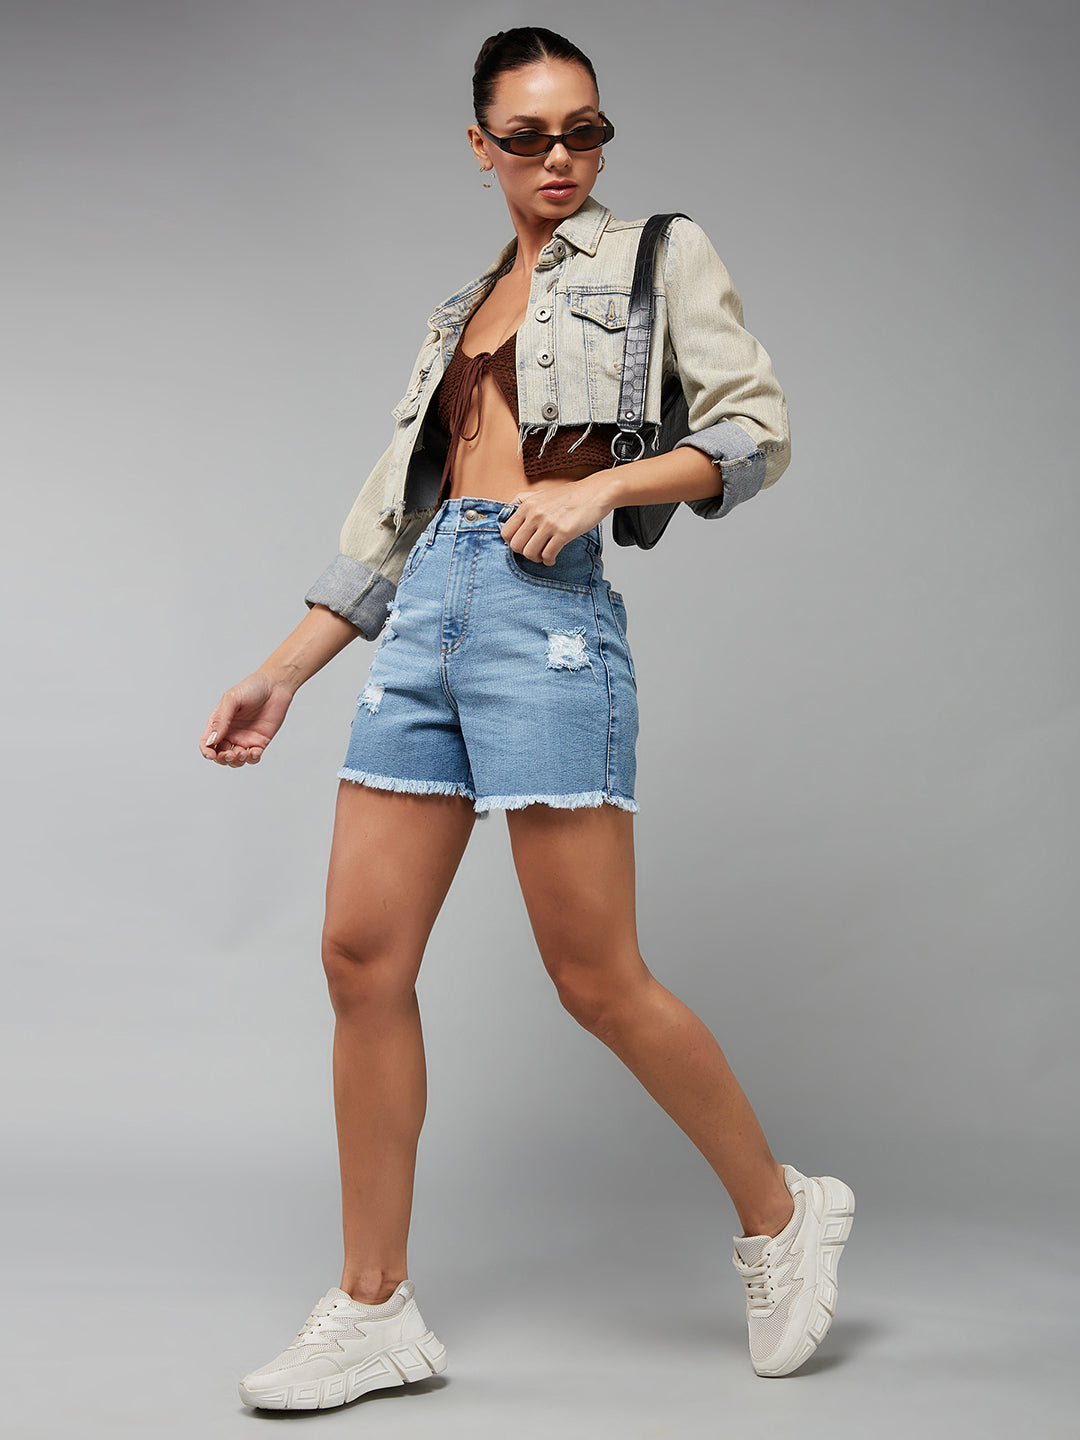 Women's Light Blue Relaxed Fit Mid Rise Highly Distressed Regular Denim Shorts